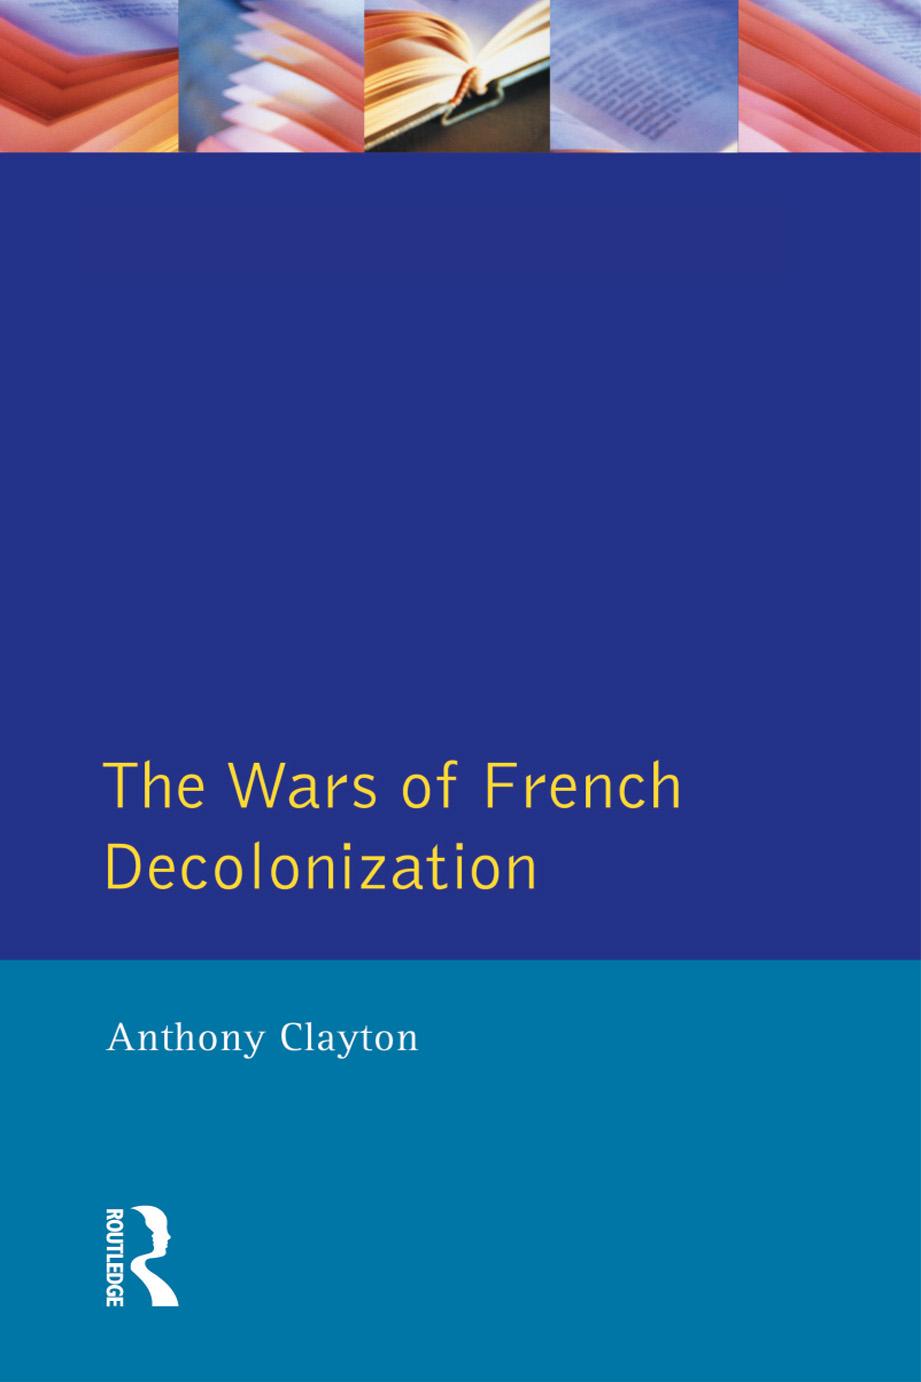 The Wars of French Decolonization (Modern Wars In Perspective) by Anthony Clayton